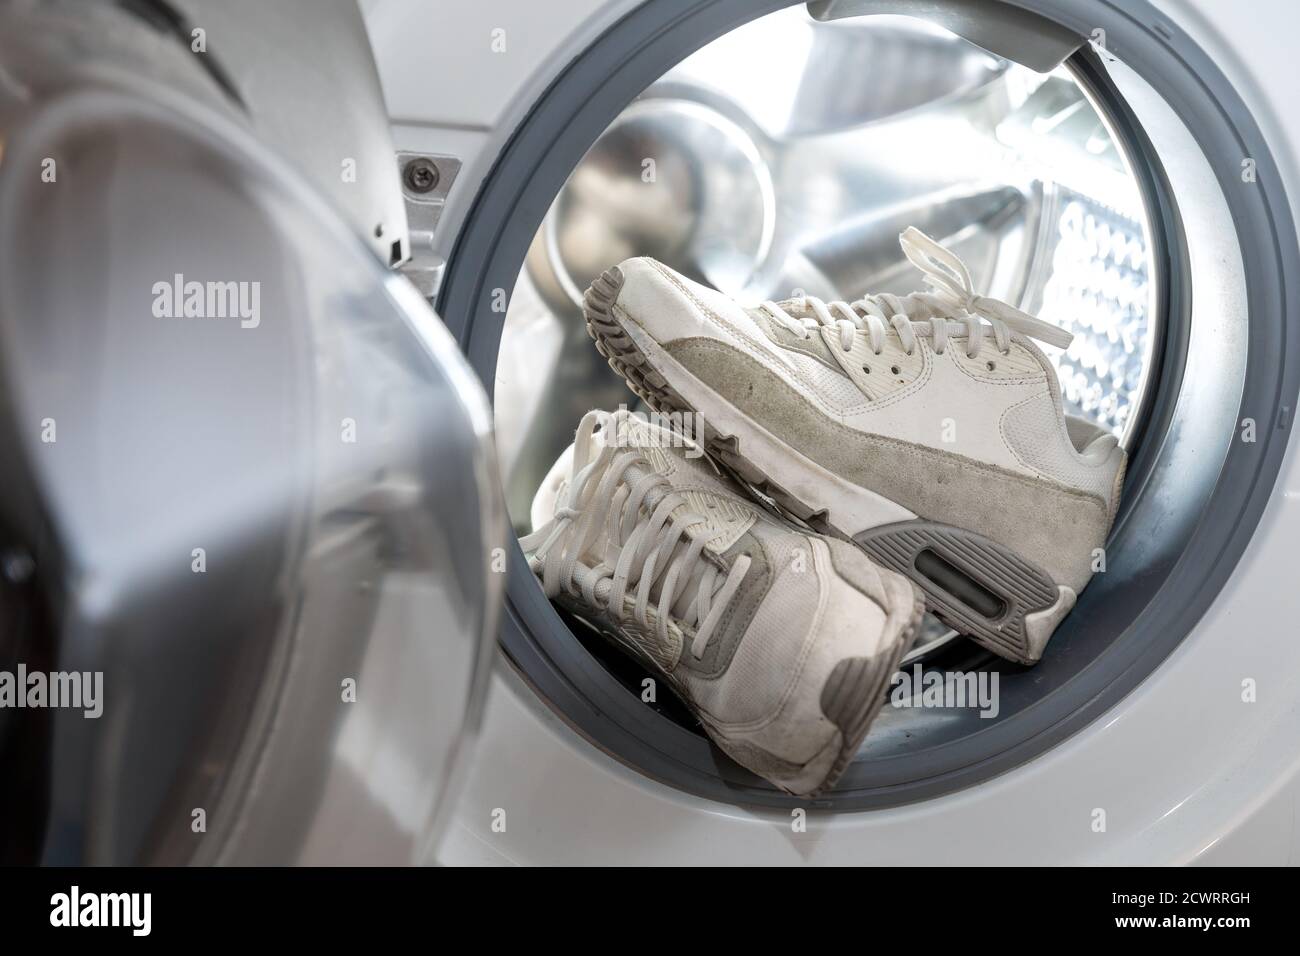 footwear hygiene - pair of dirty white sneakers in the washing machine Stock Photo